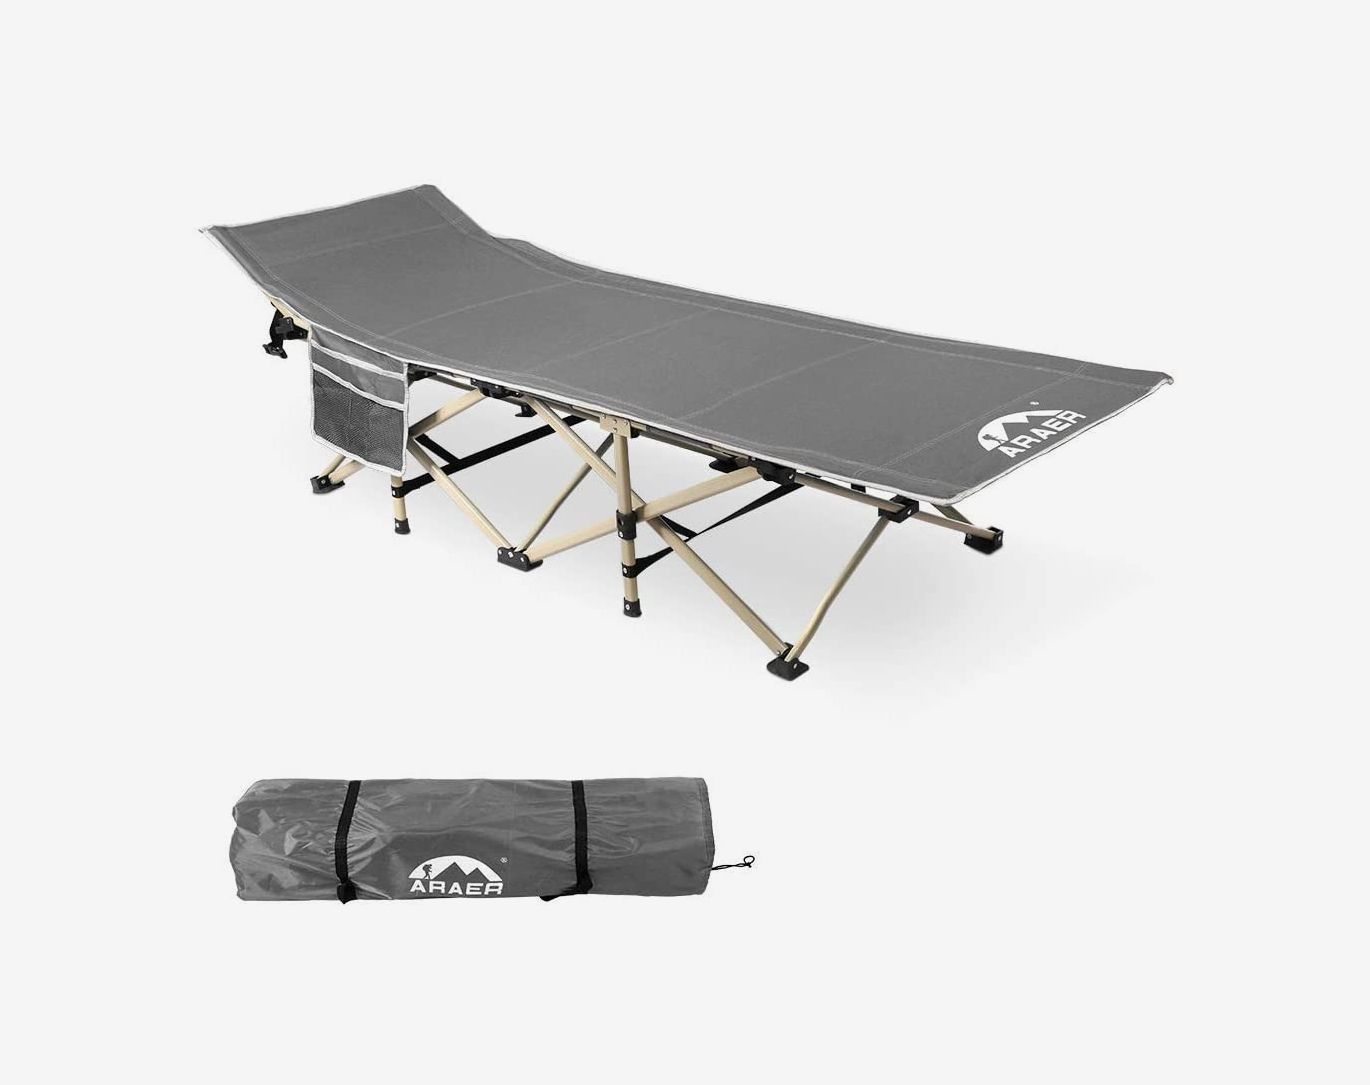 Strong Stable Collapsible Folding Camping Cot Great for Camping Niceway Oxford Portable Folding Bed Camping Cot with Storage Bag Traveling and Home Lounging 